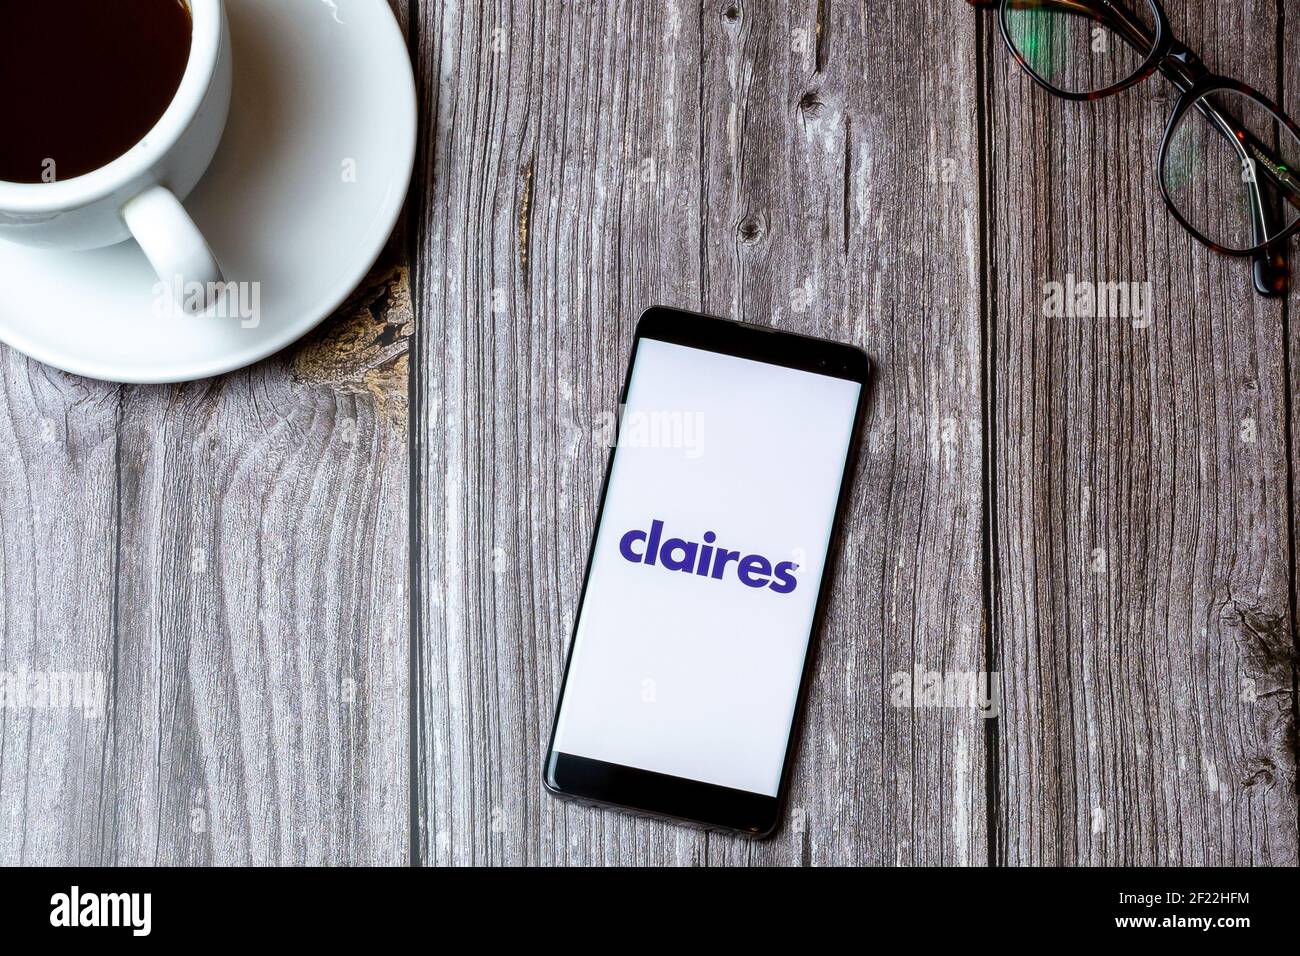 A mobile phone or cell phone laid on a wooden table with the claires app open on screen next to a coffee Stock Photo